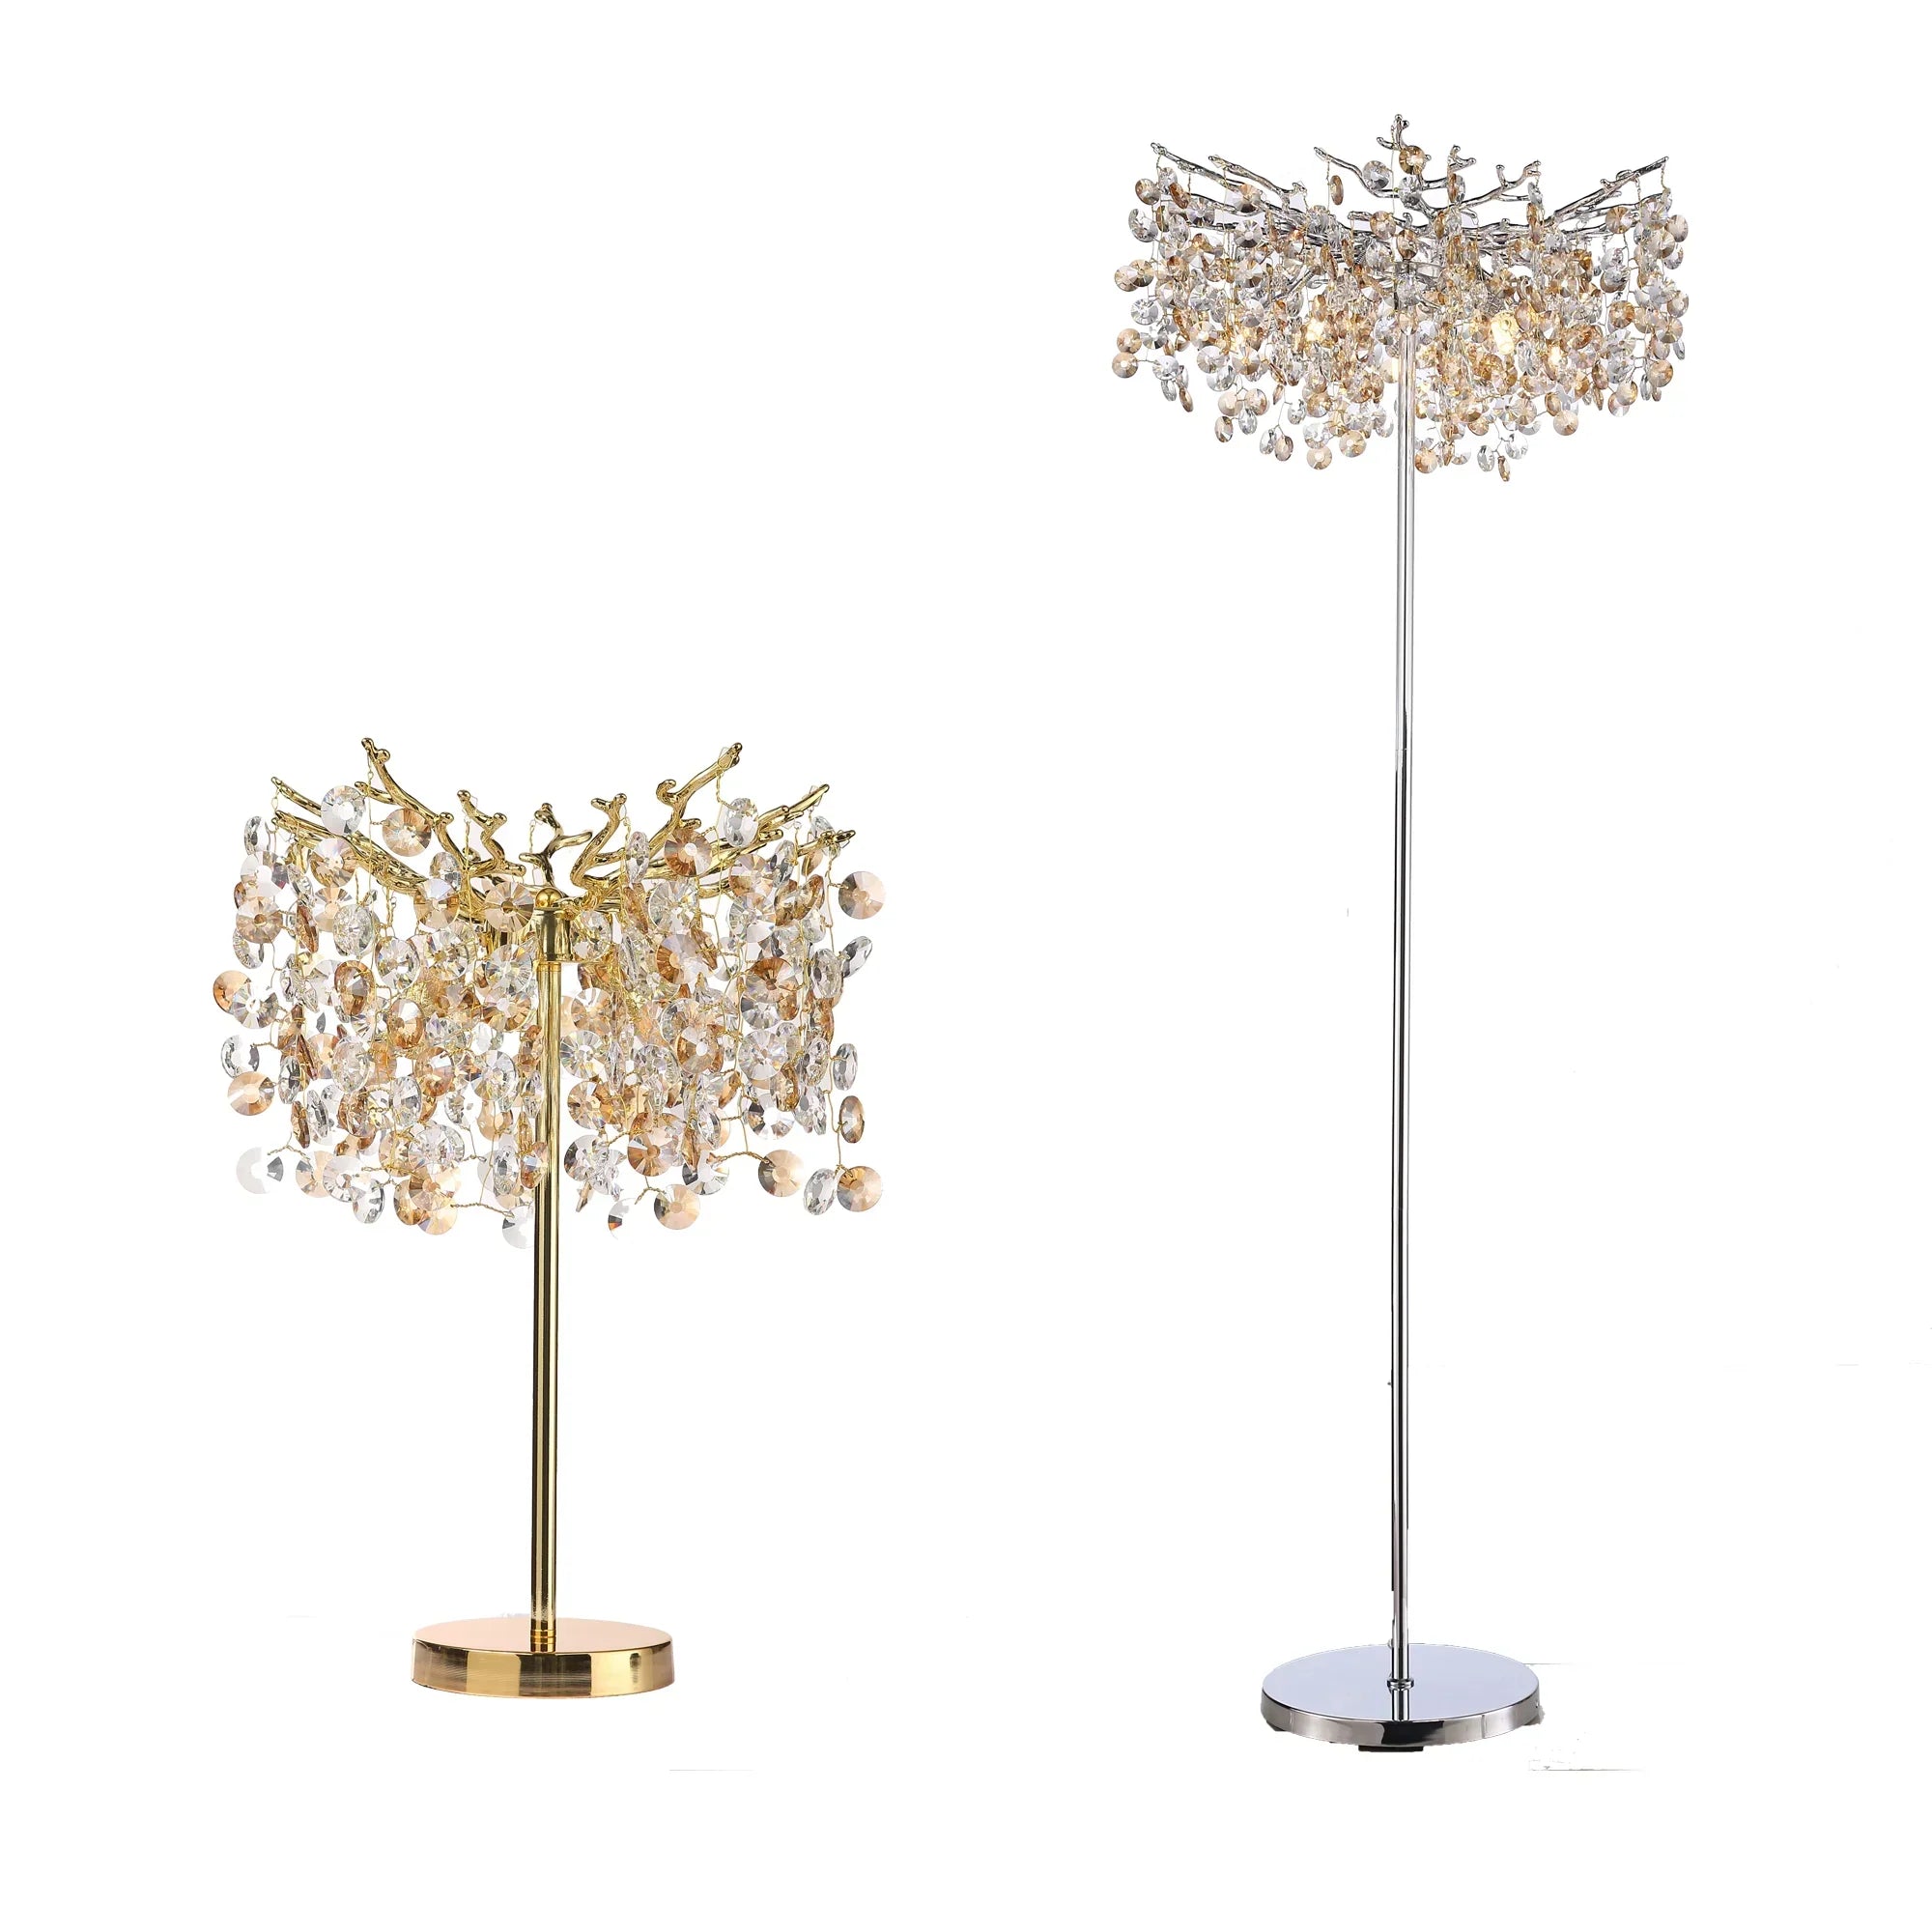 North Modern Crystal Gold Table Lamp for Living Room